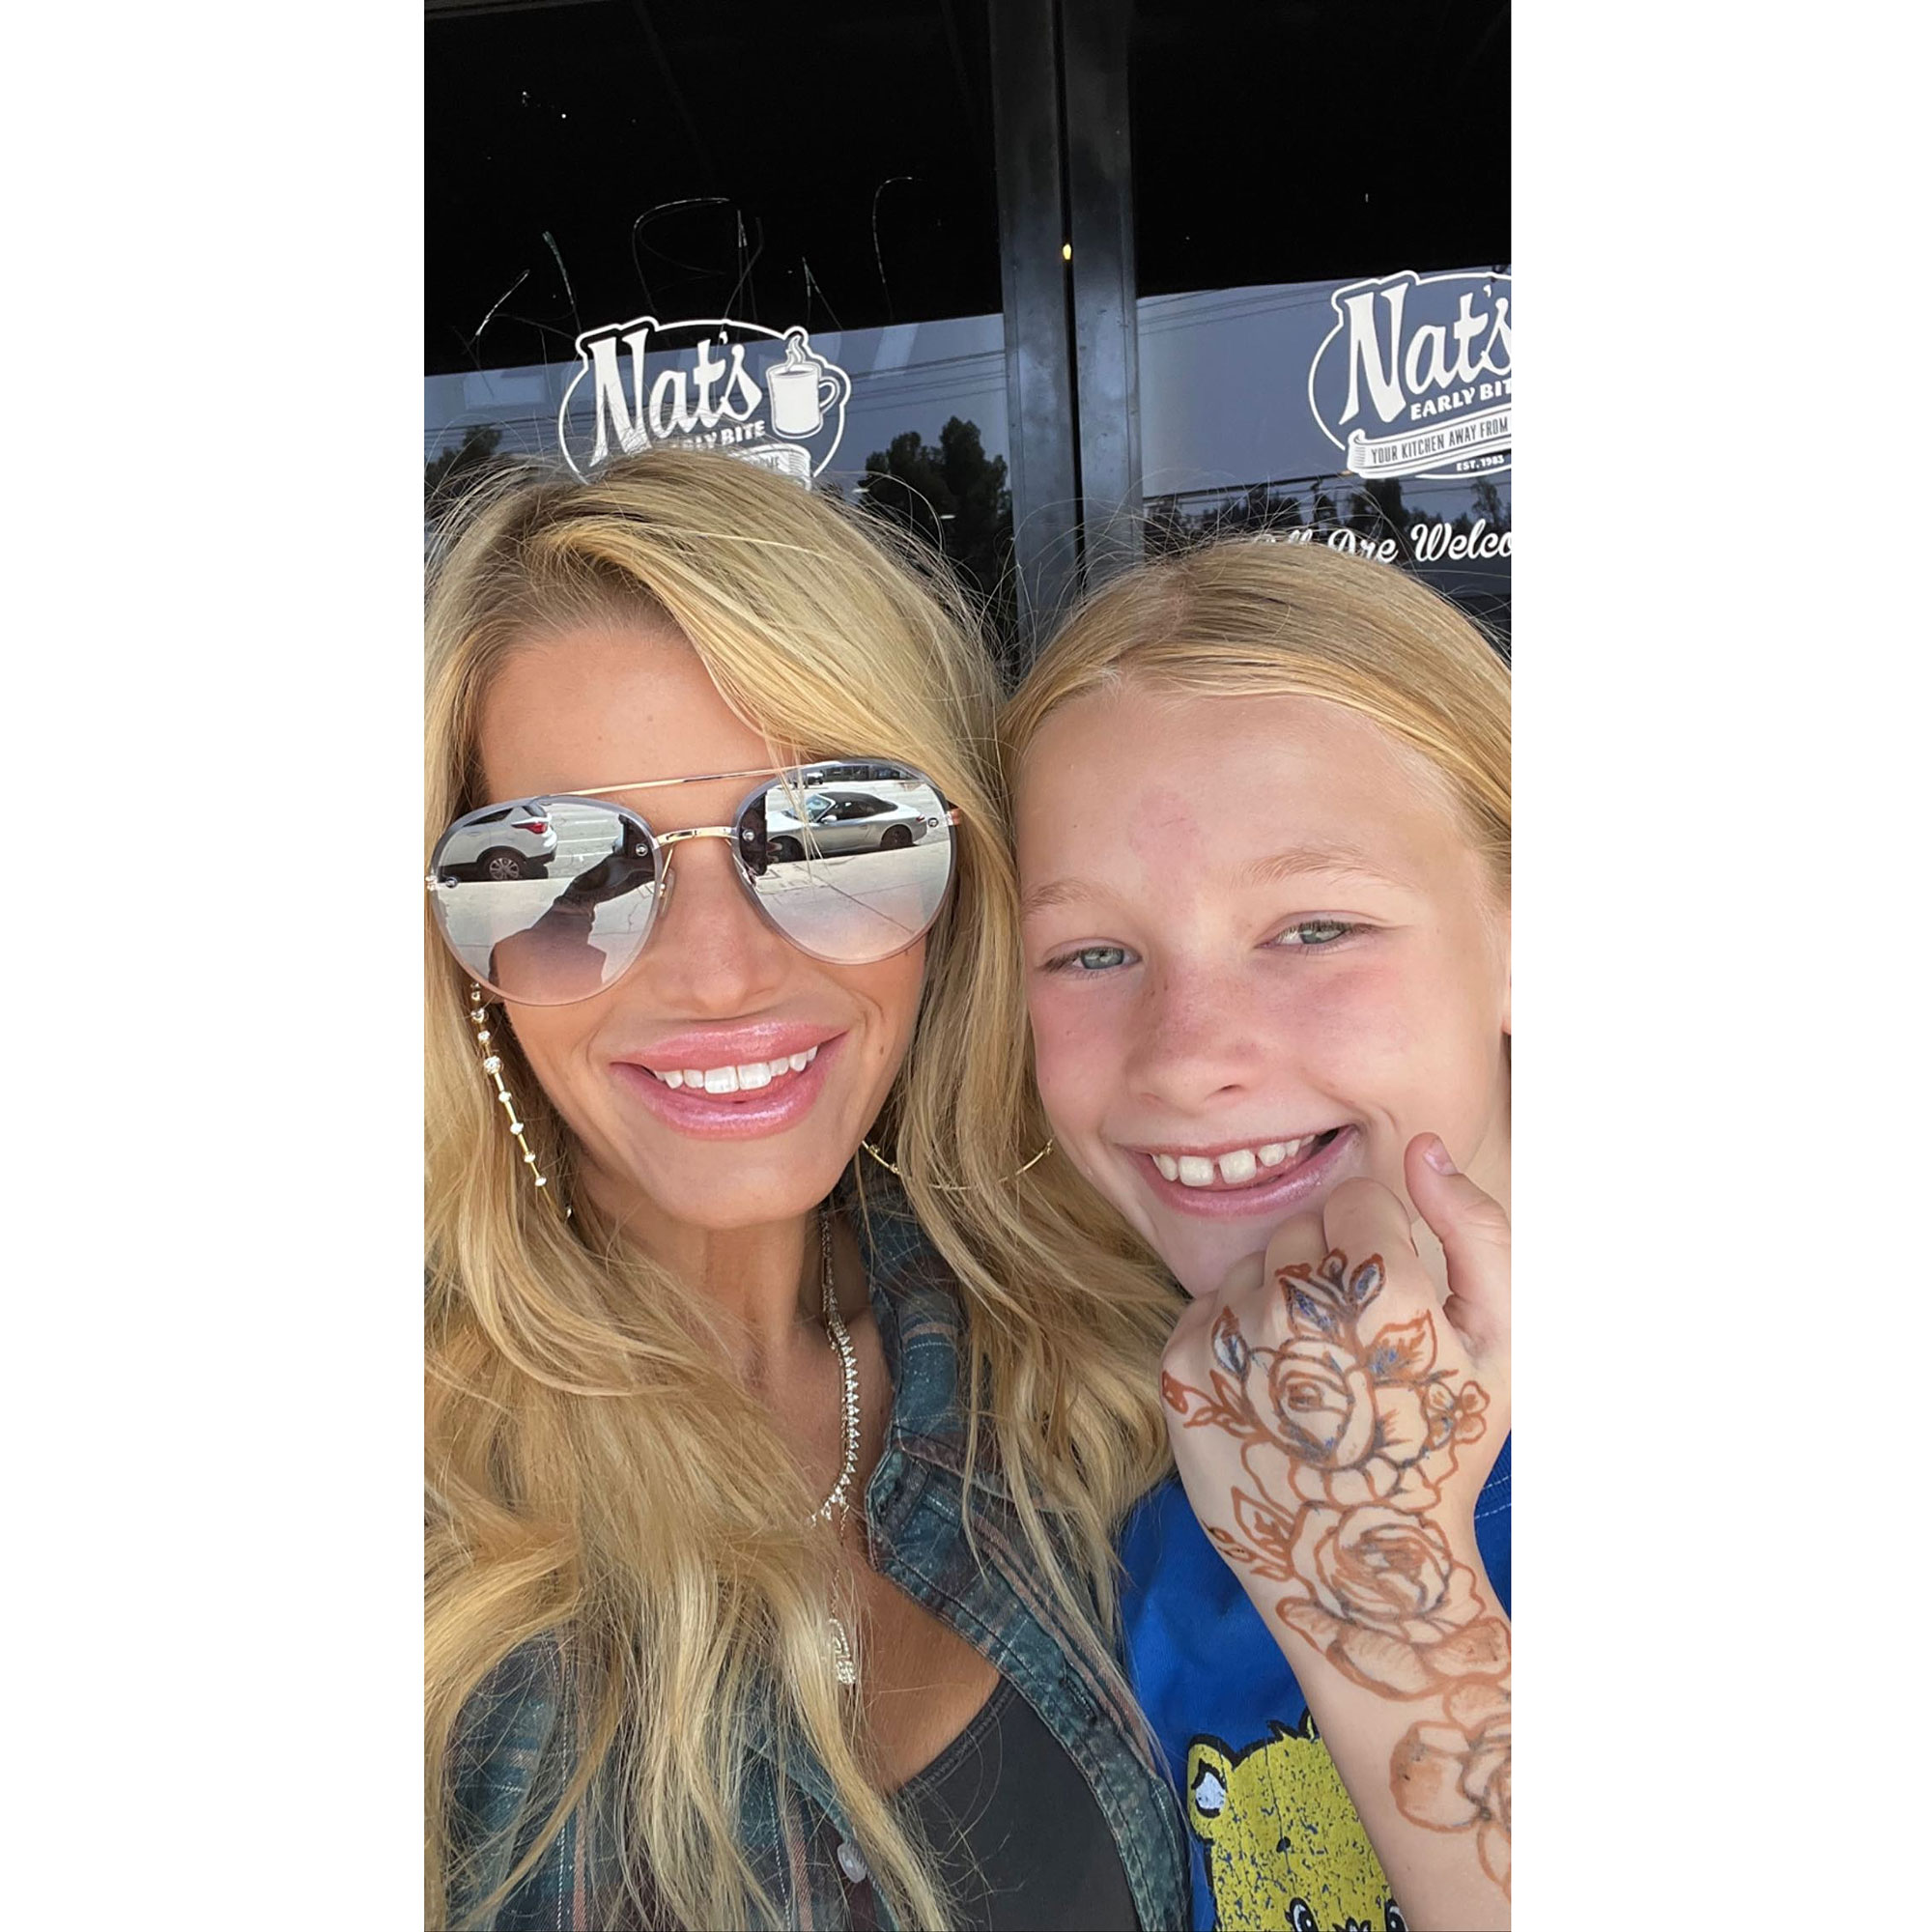 Jessica Simpson's daughter has seen Katy Perry perform but not mom